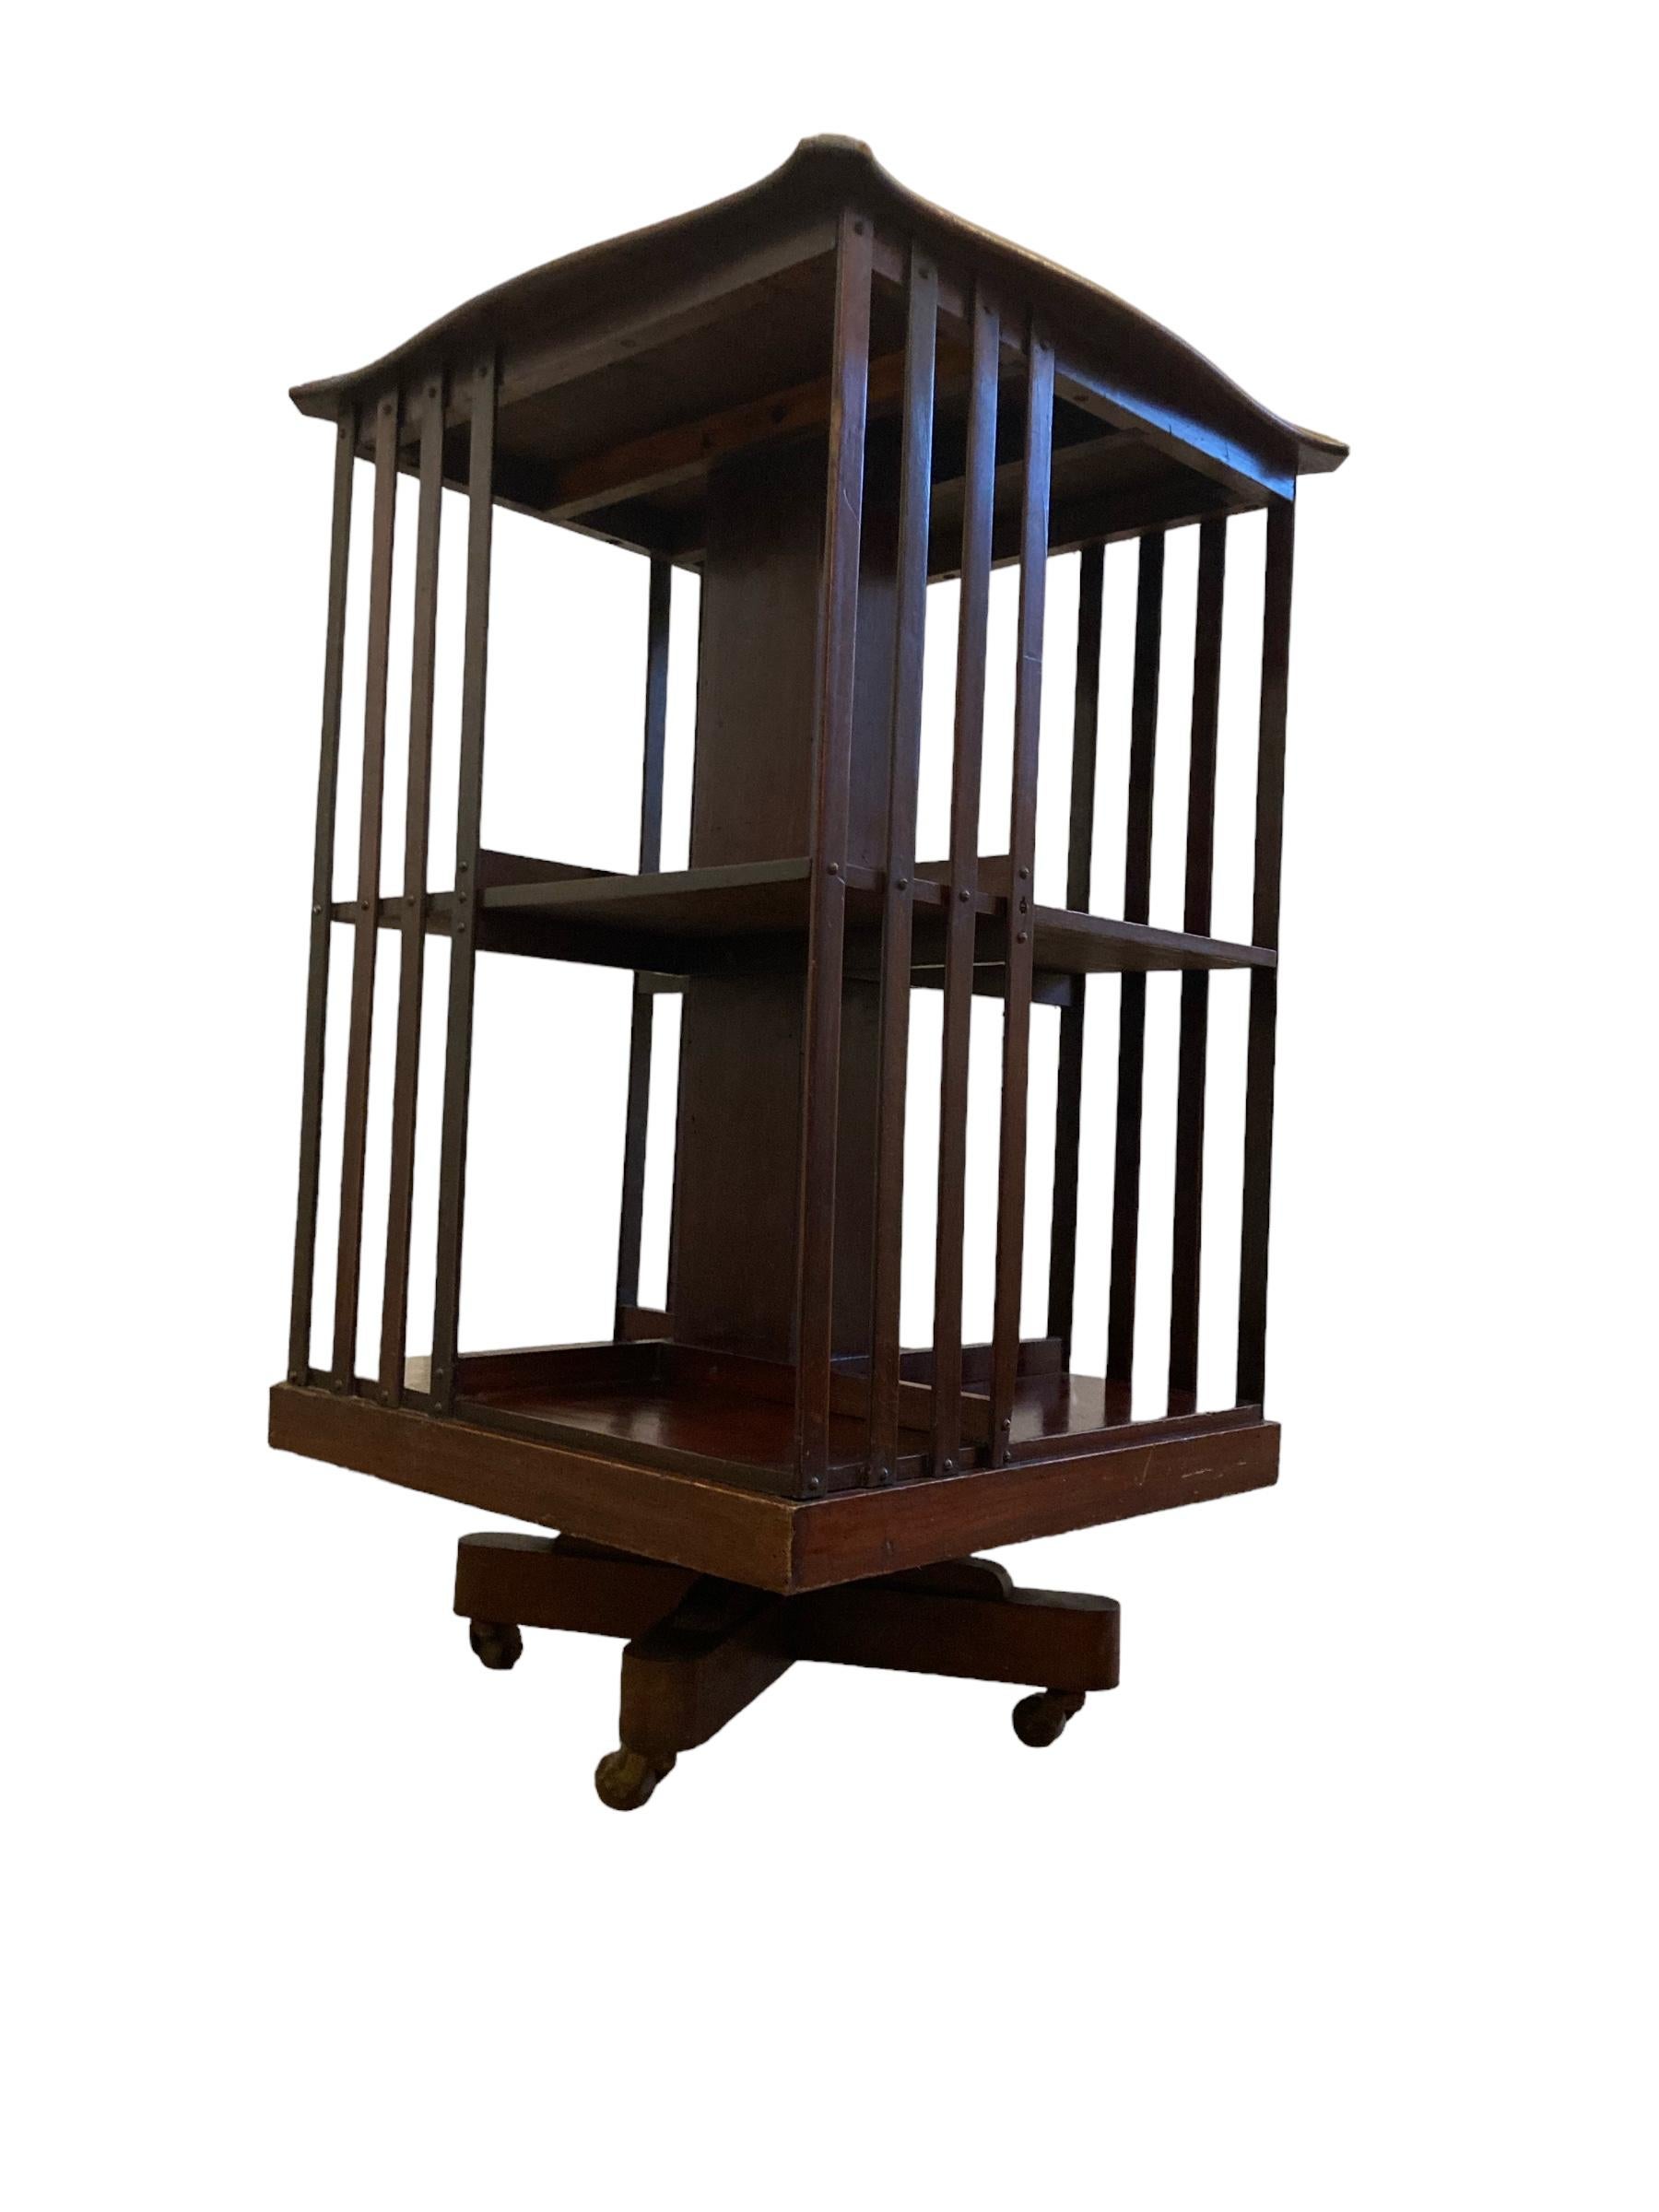 Edwardian Mahogany revolving Bookcase on casters and slatted supports is a perfect addition to any space. Crafted with high-quality Mahogany wood, it offers both functionality and style. The shelves provide ample storage for books, decor, or other